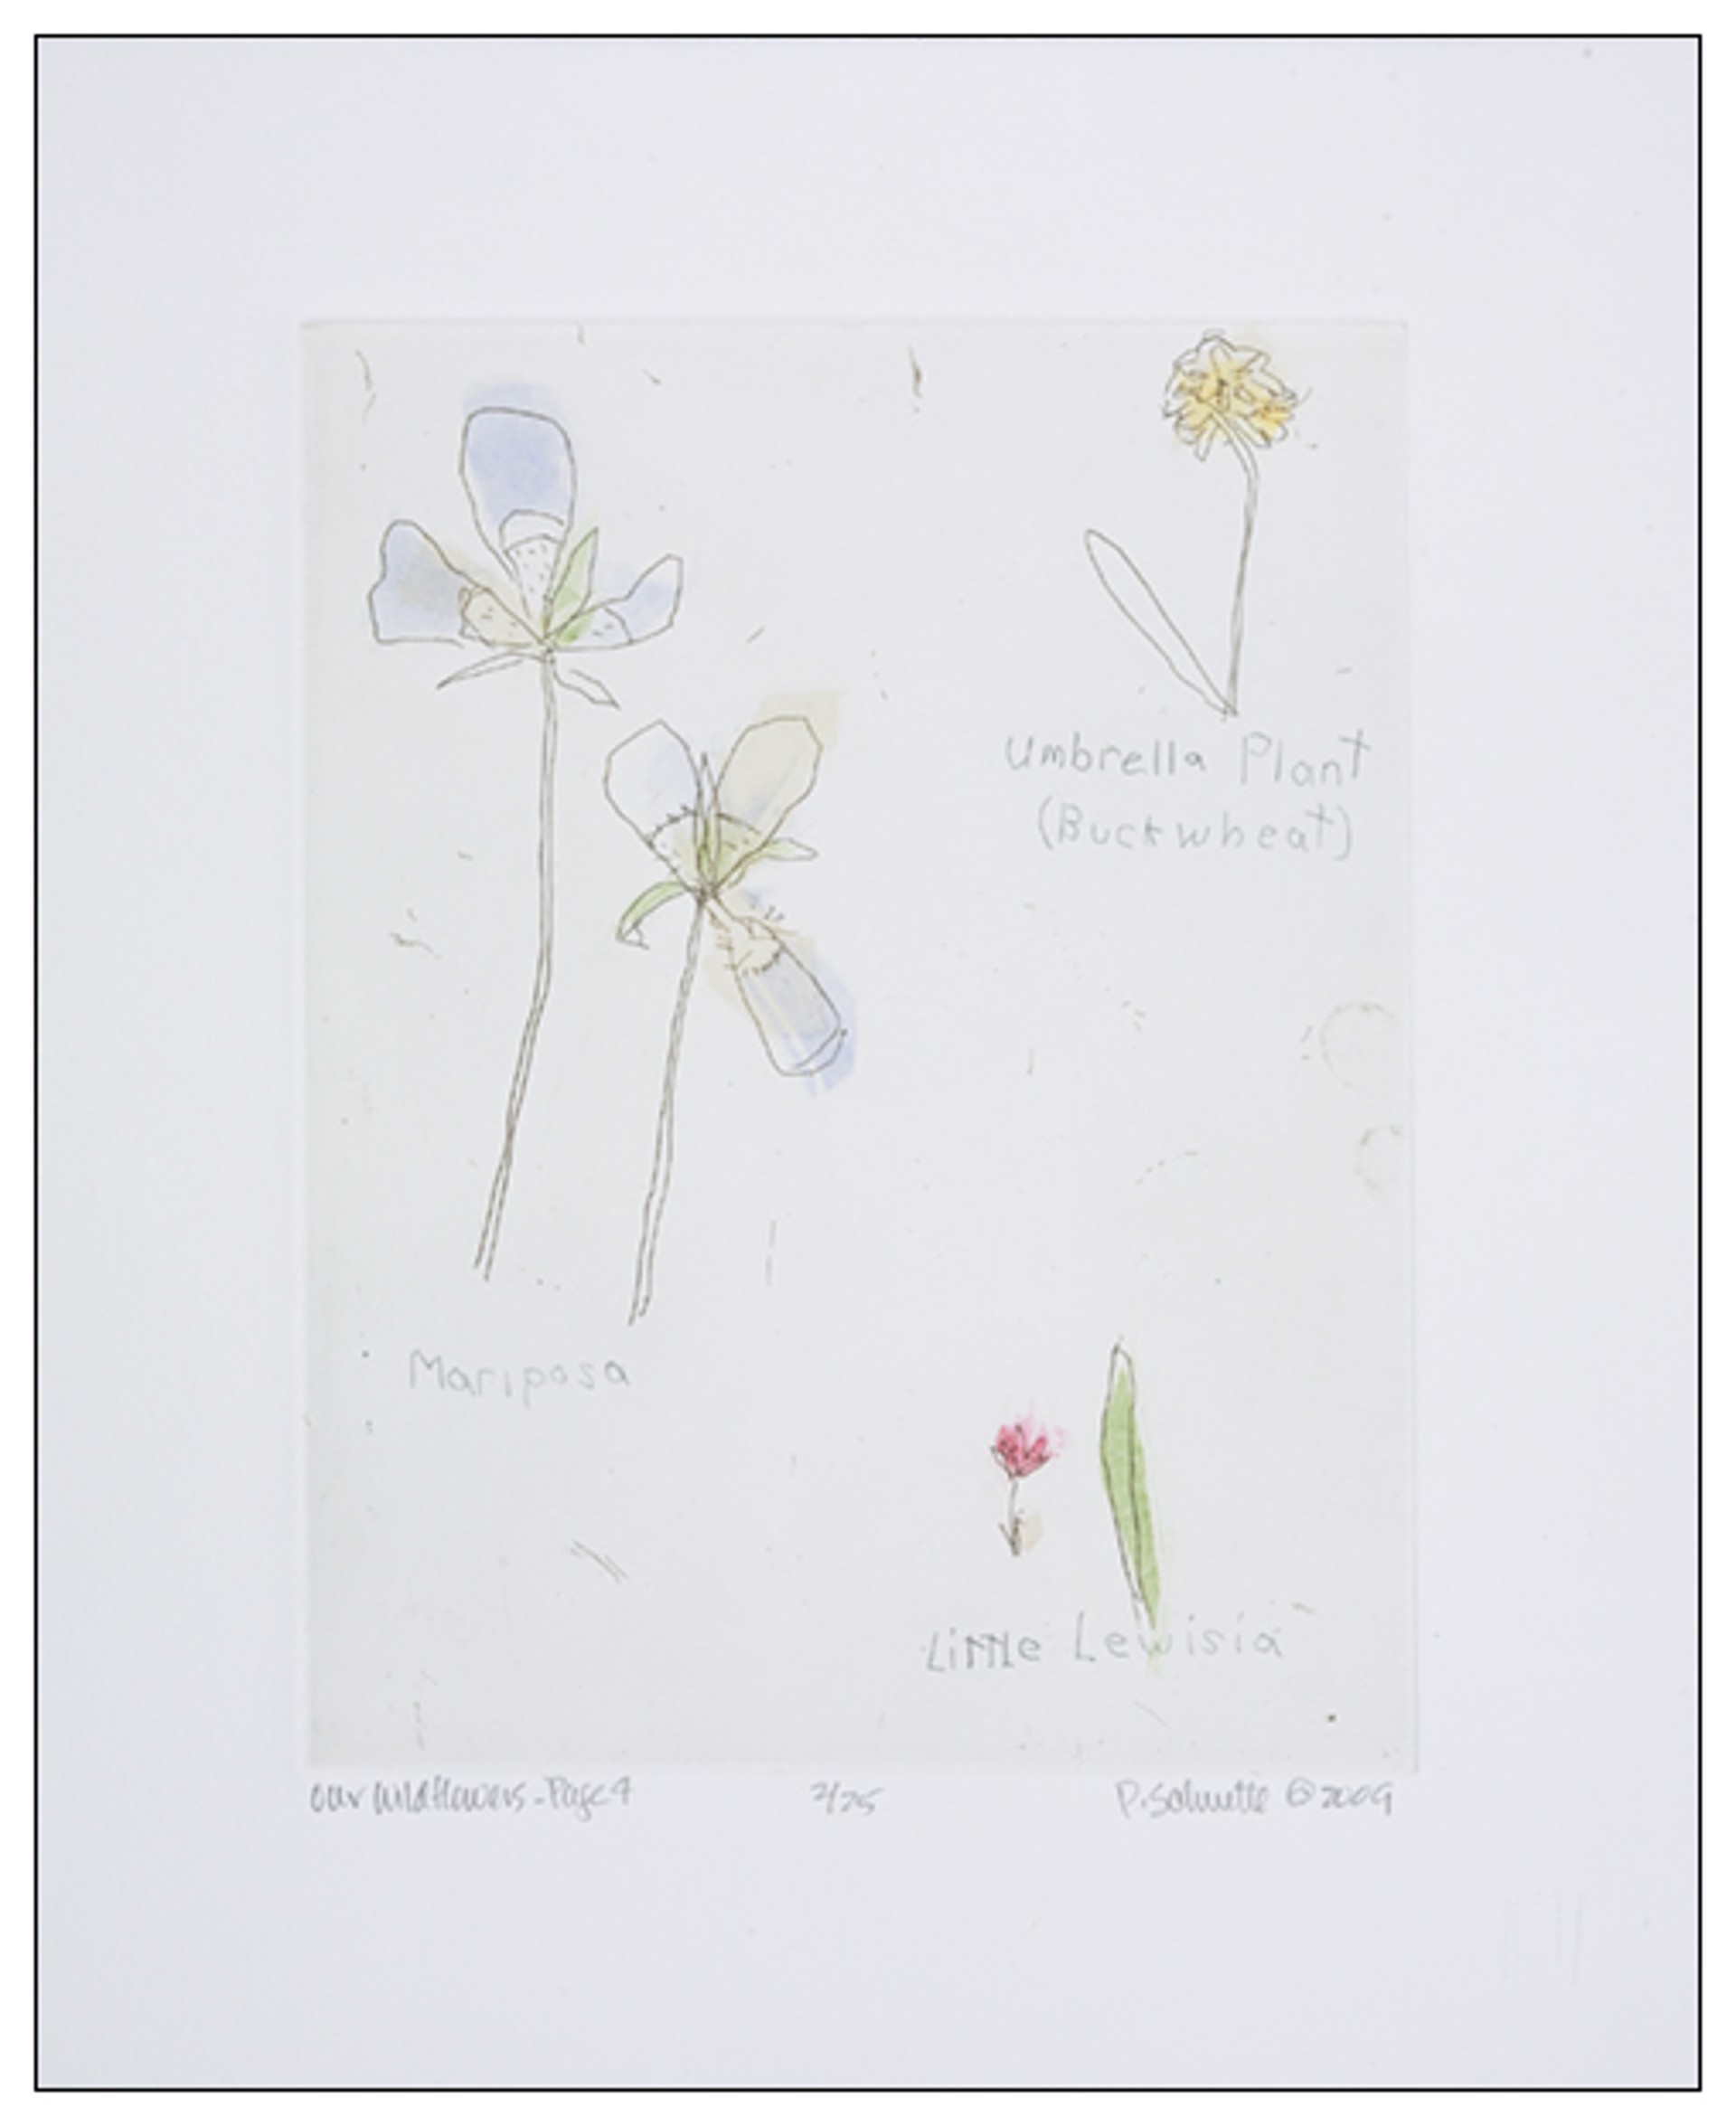 Our Wild Flowers: Page 4 by Paula Schuette Kraemer